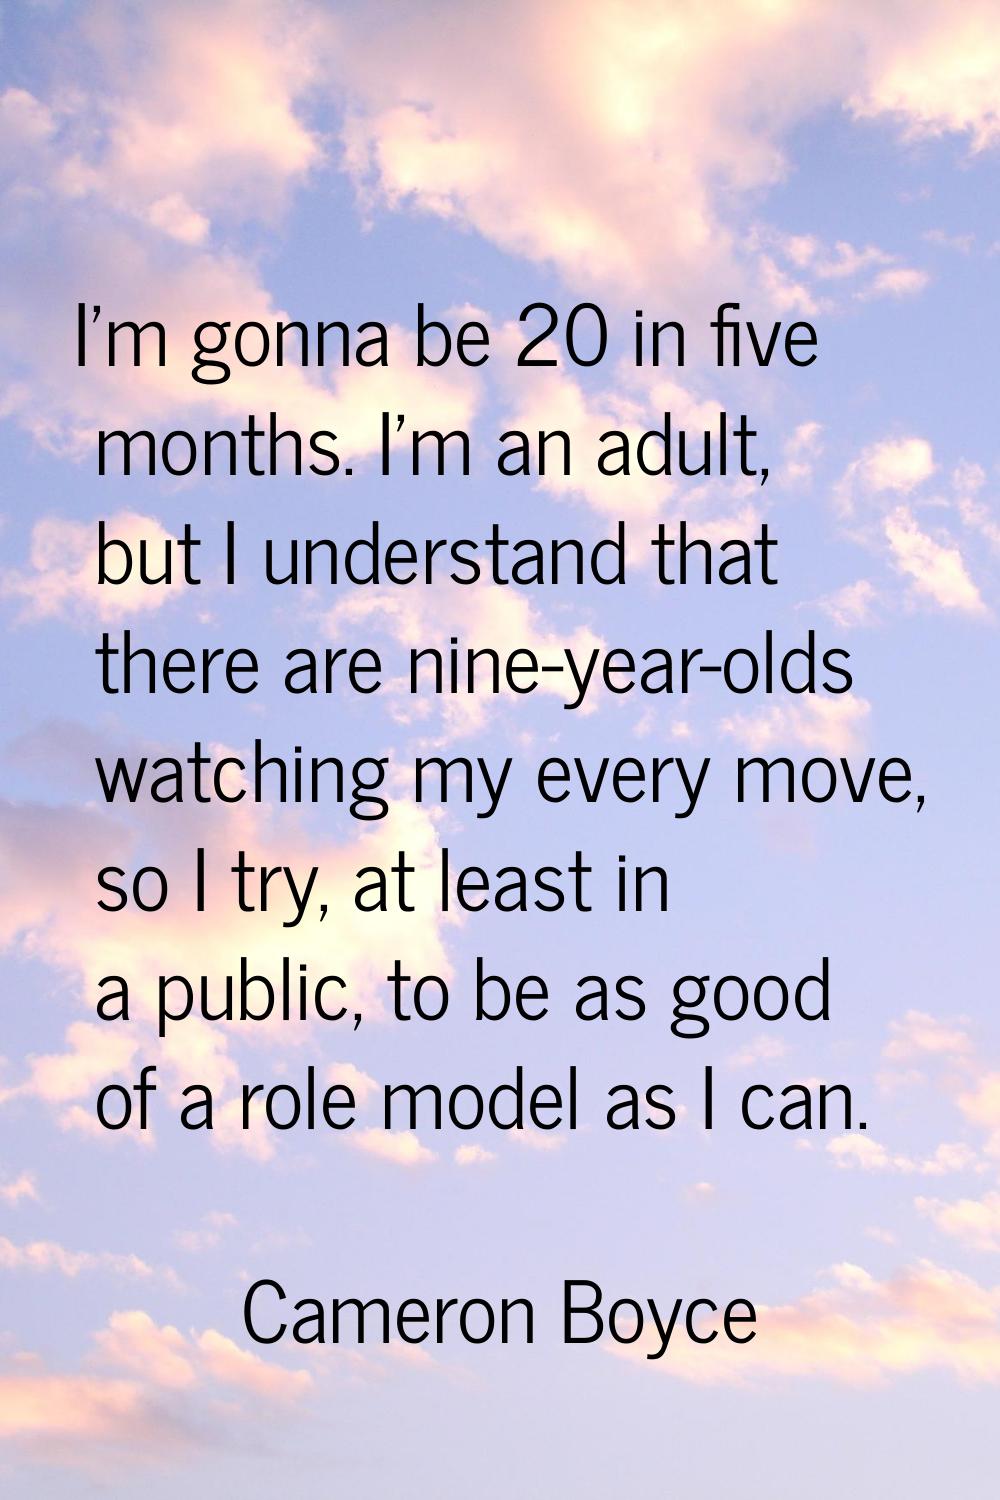 I'm gonna be 20 in five months. I'm an adult, but I understand that there are nine-year-olds watchi